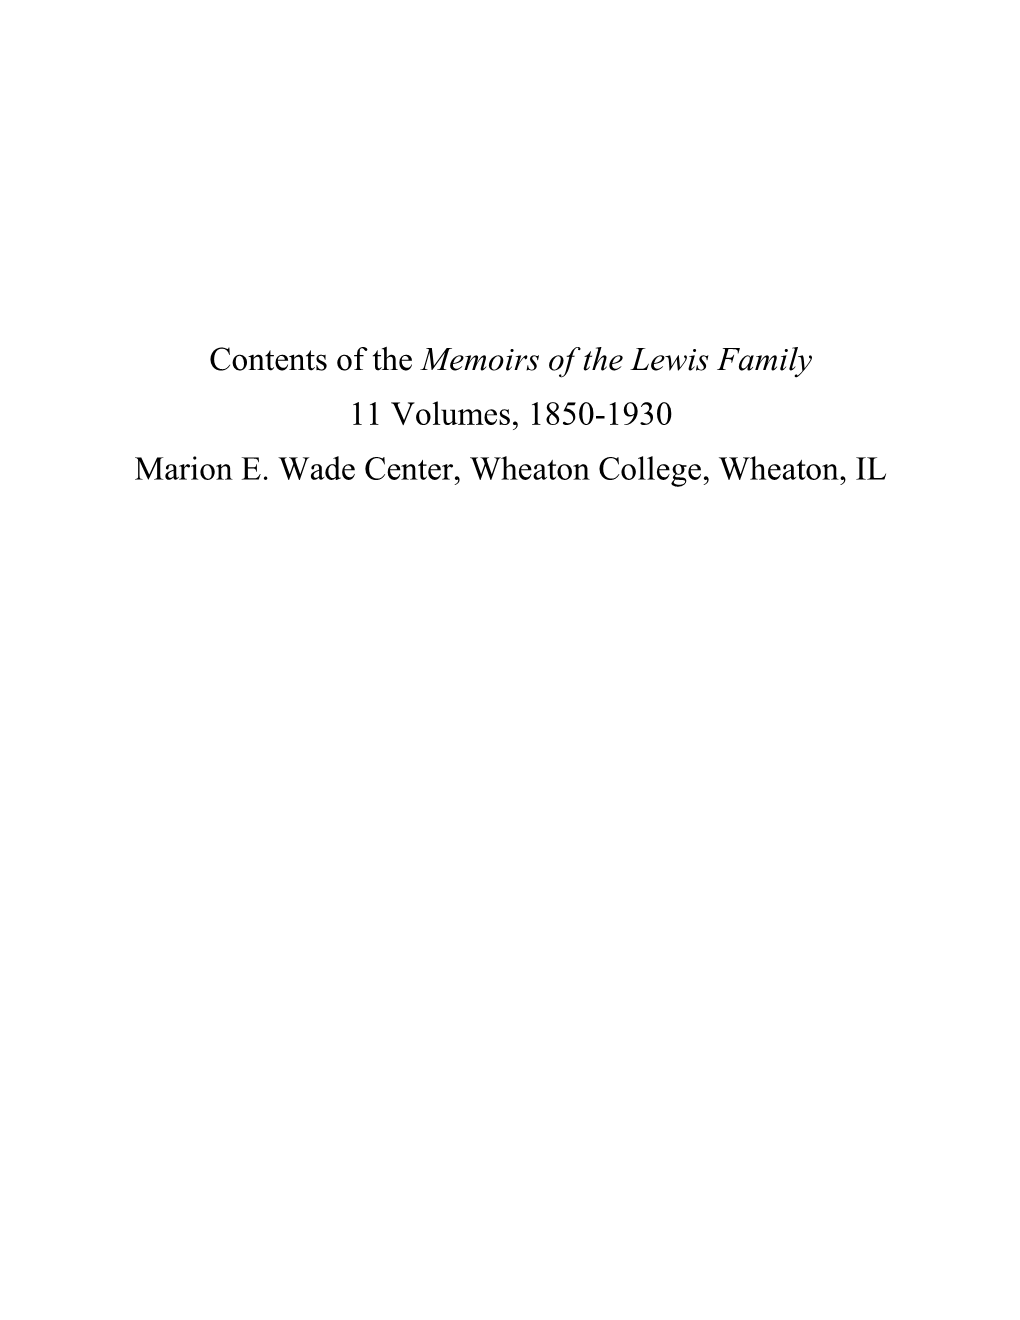 Contents of the Memoirs of the Lewis Family 11 Volumes, 1850-1930 Marion E